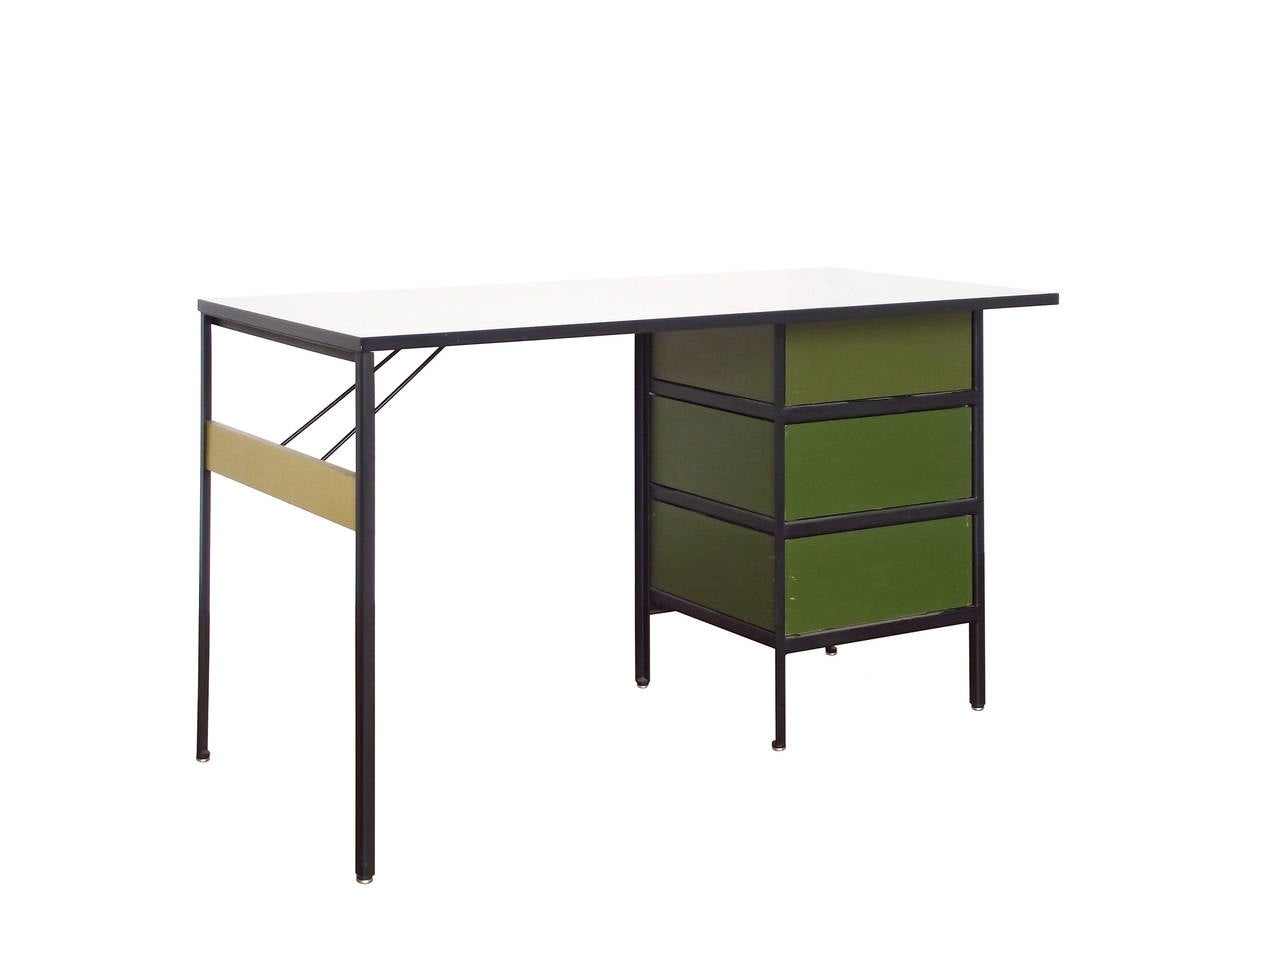 An original steel frame desk designed by George Nelson and produced by Herman Miller from 1954-1966. Comprises an exoskeleton frame in bent and enameled iron, a bank of three drawers at left with sculptural, polished chrome handles, and a white